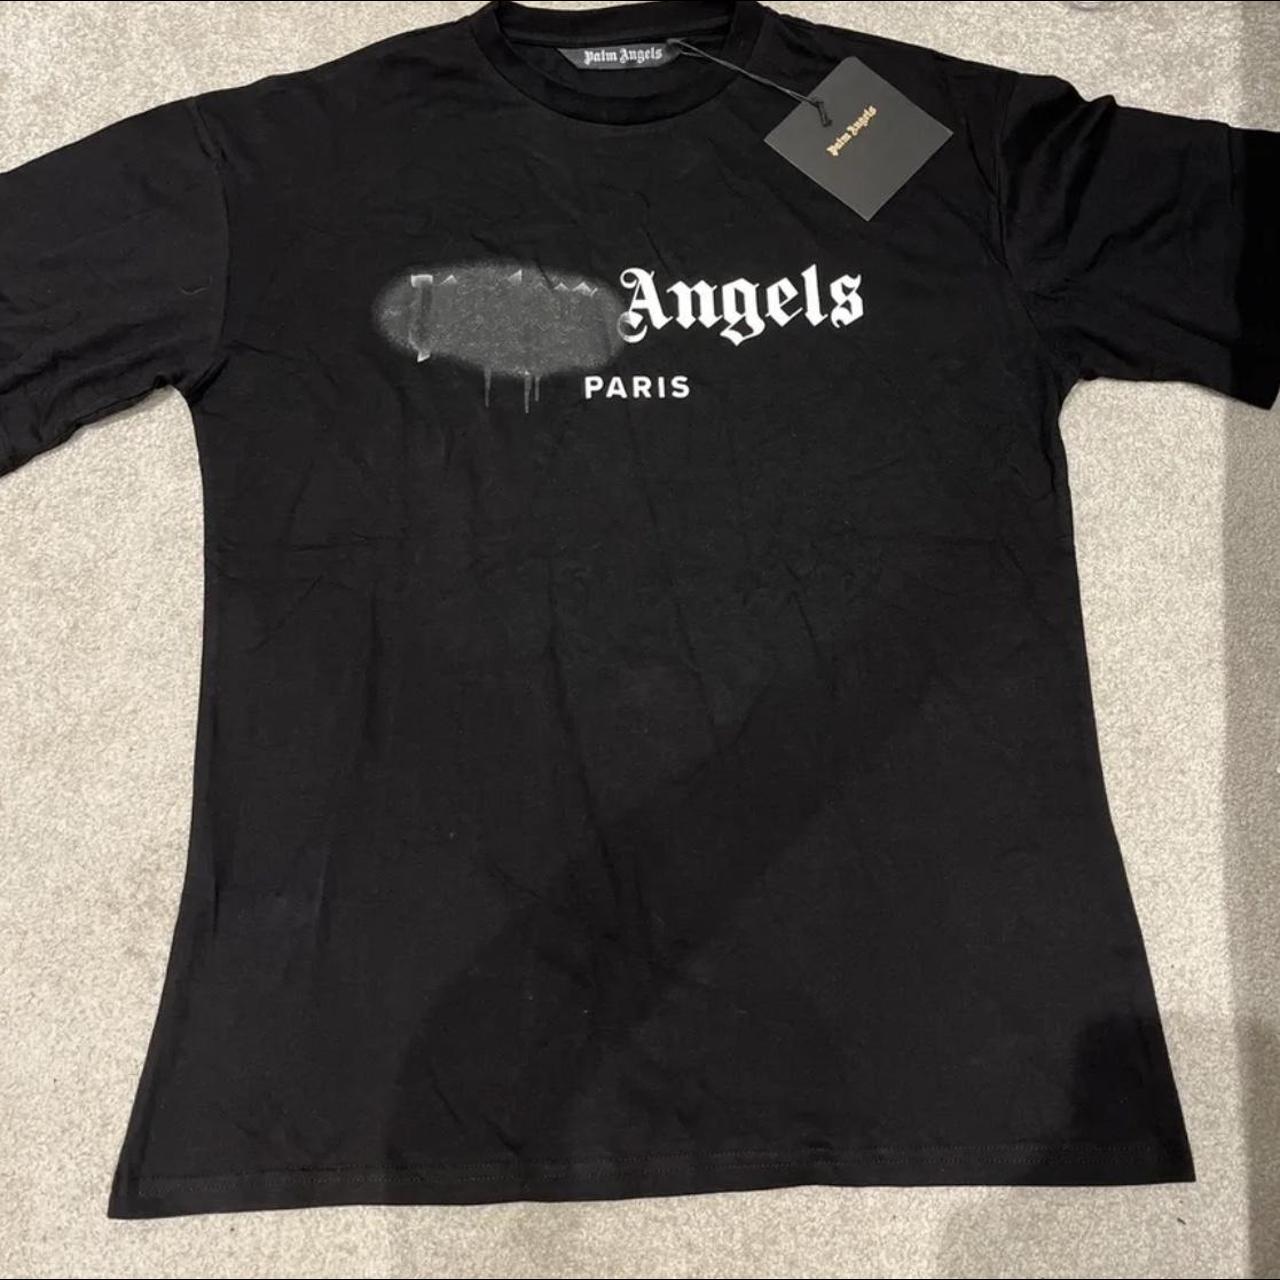 Palm angels T-shirt got as a gift really good price - Depop